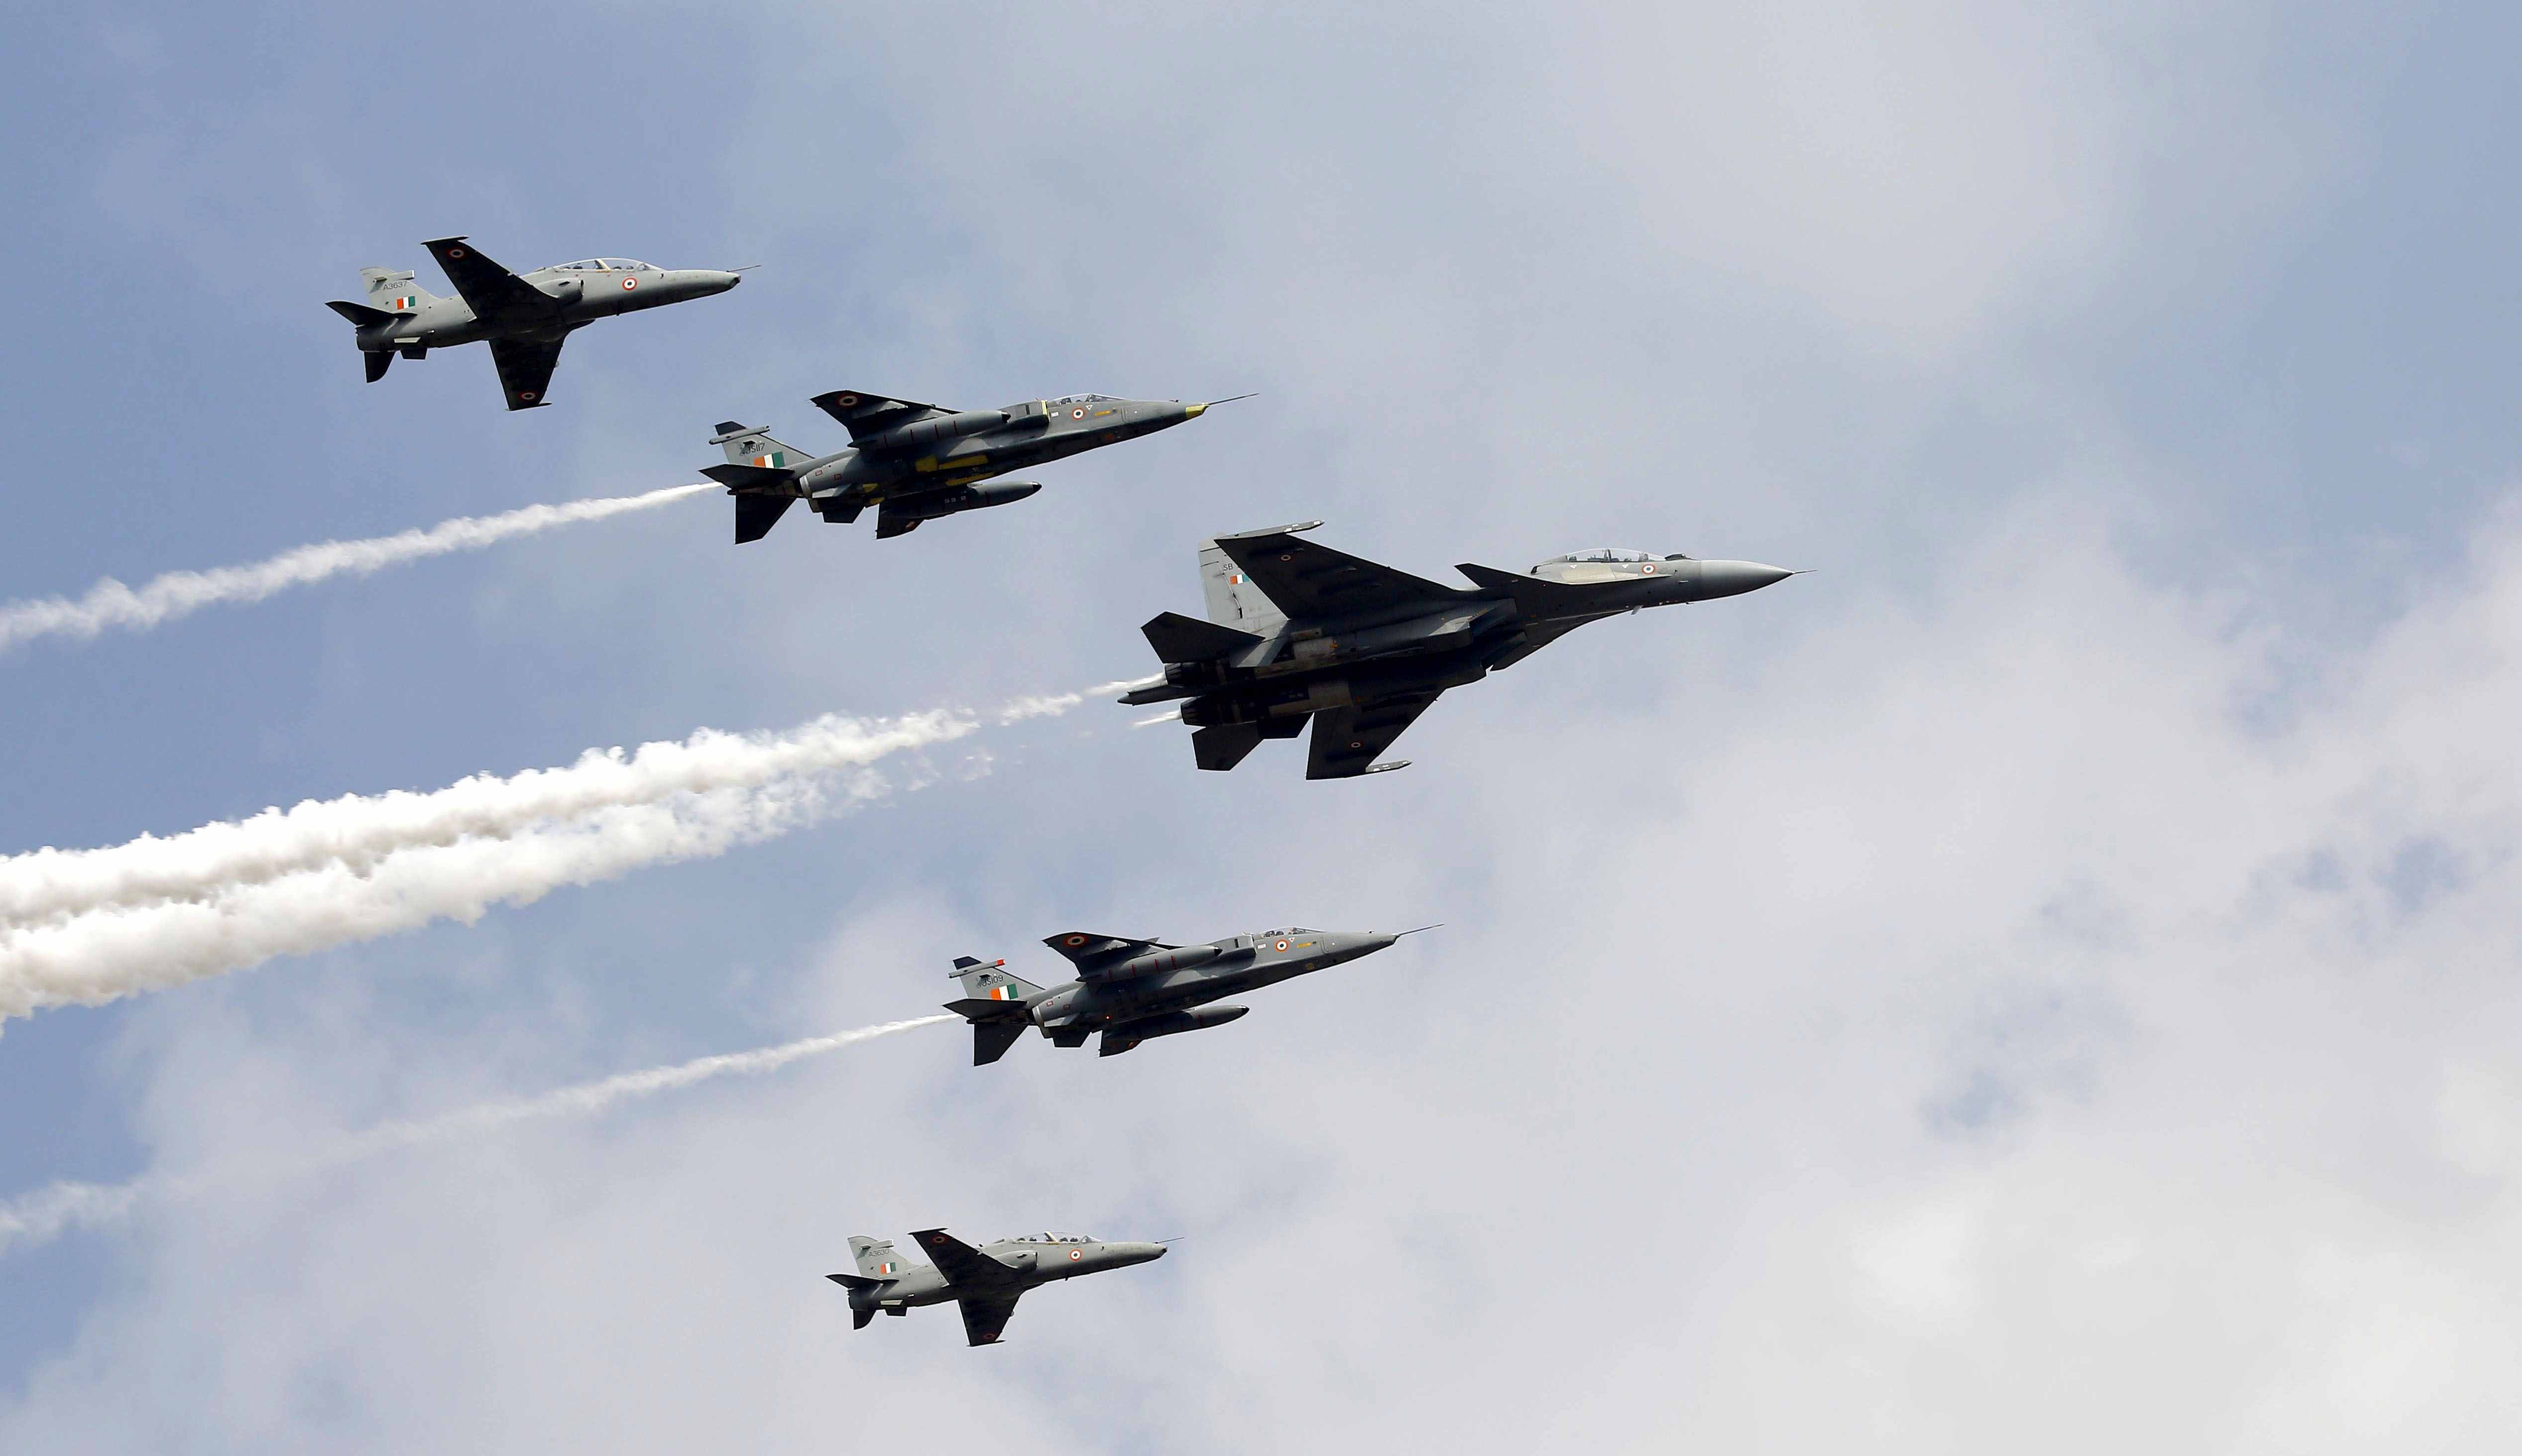 Glimpse of the Aero India-2021 biennial Air Show, at the Air Force Station, Yelahanka, in Bengaluru on February 03, 2021.